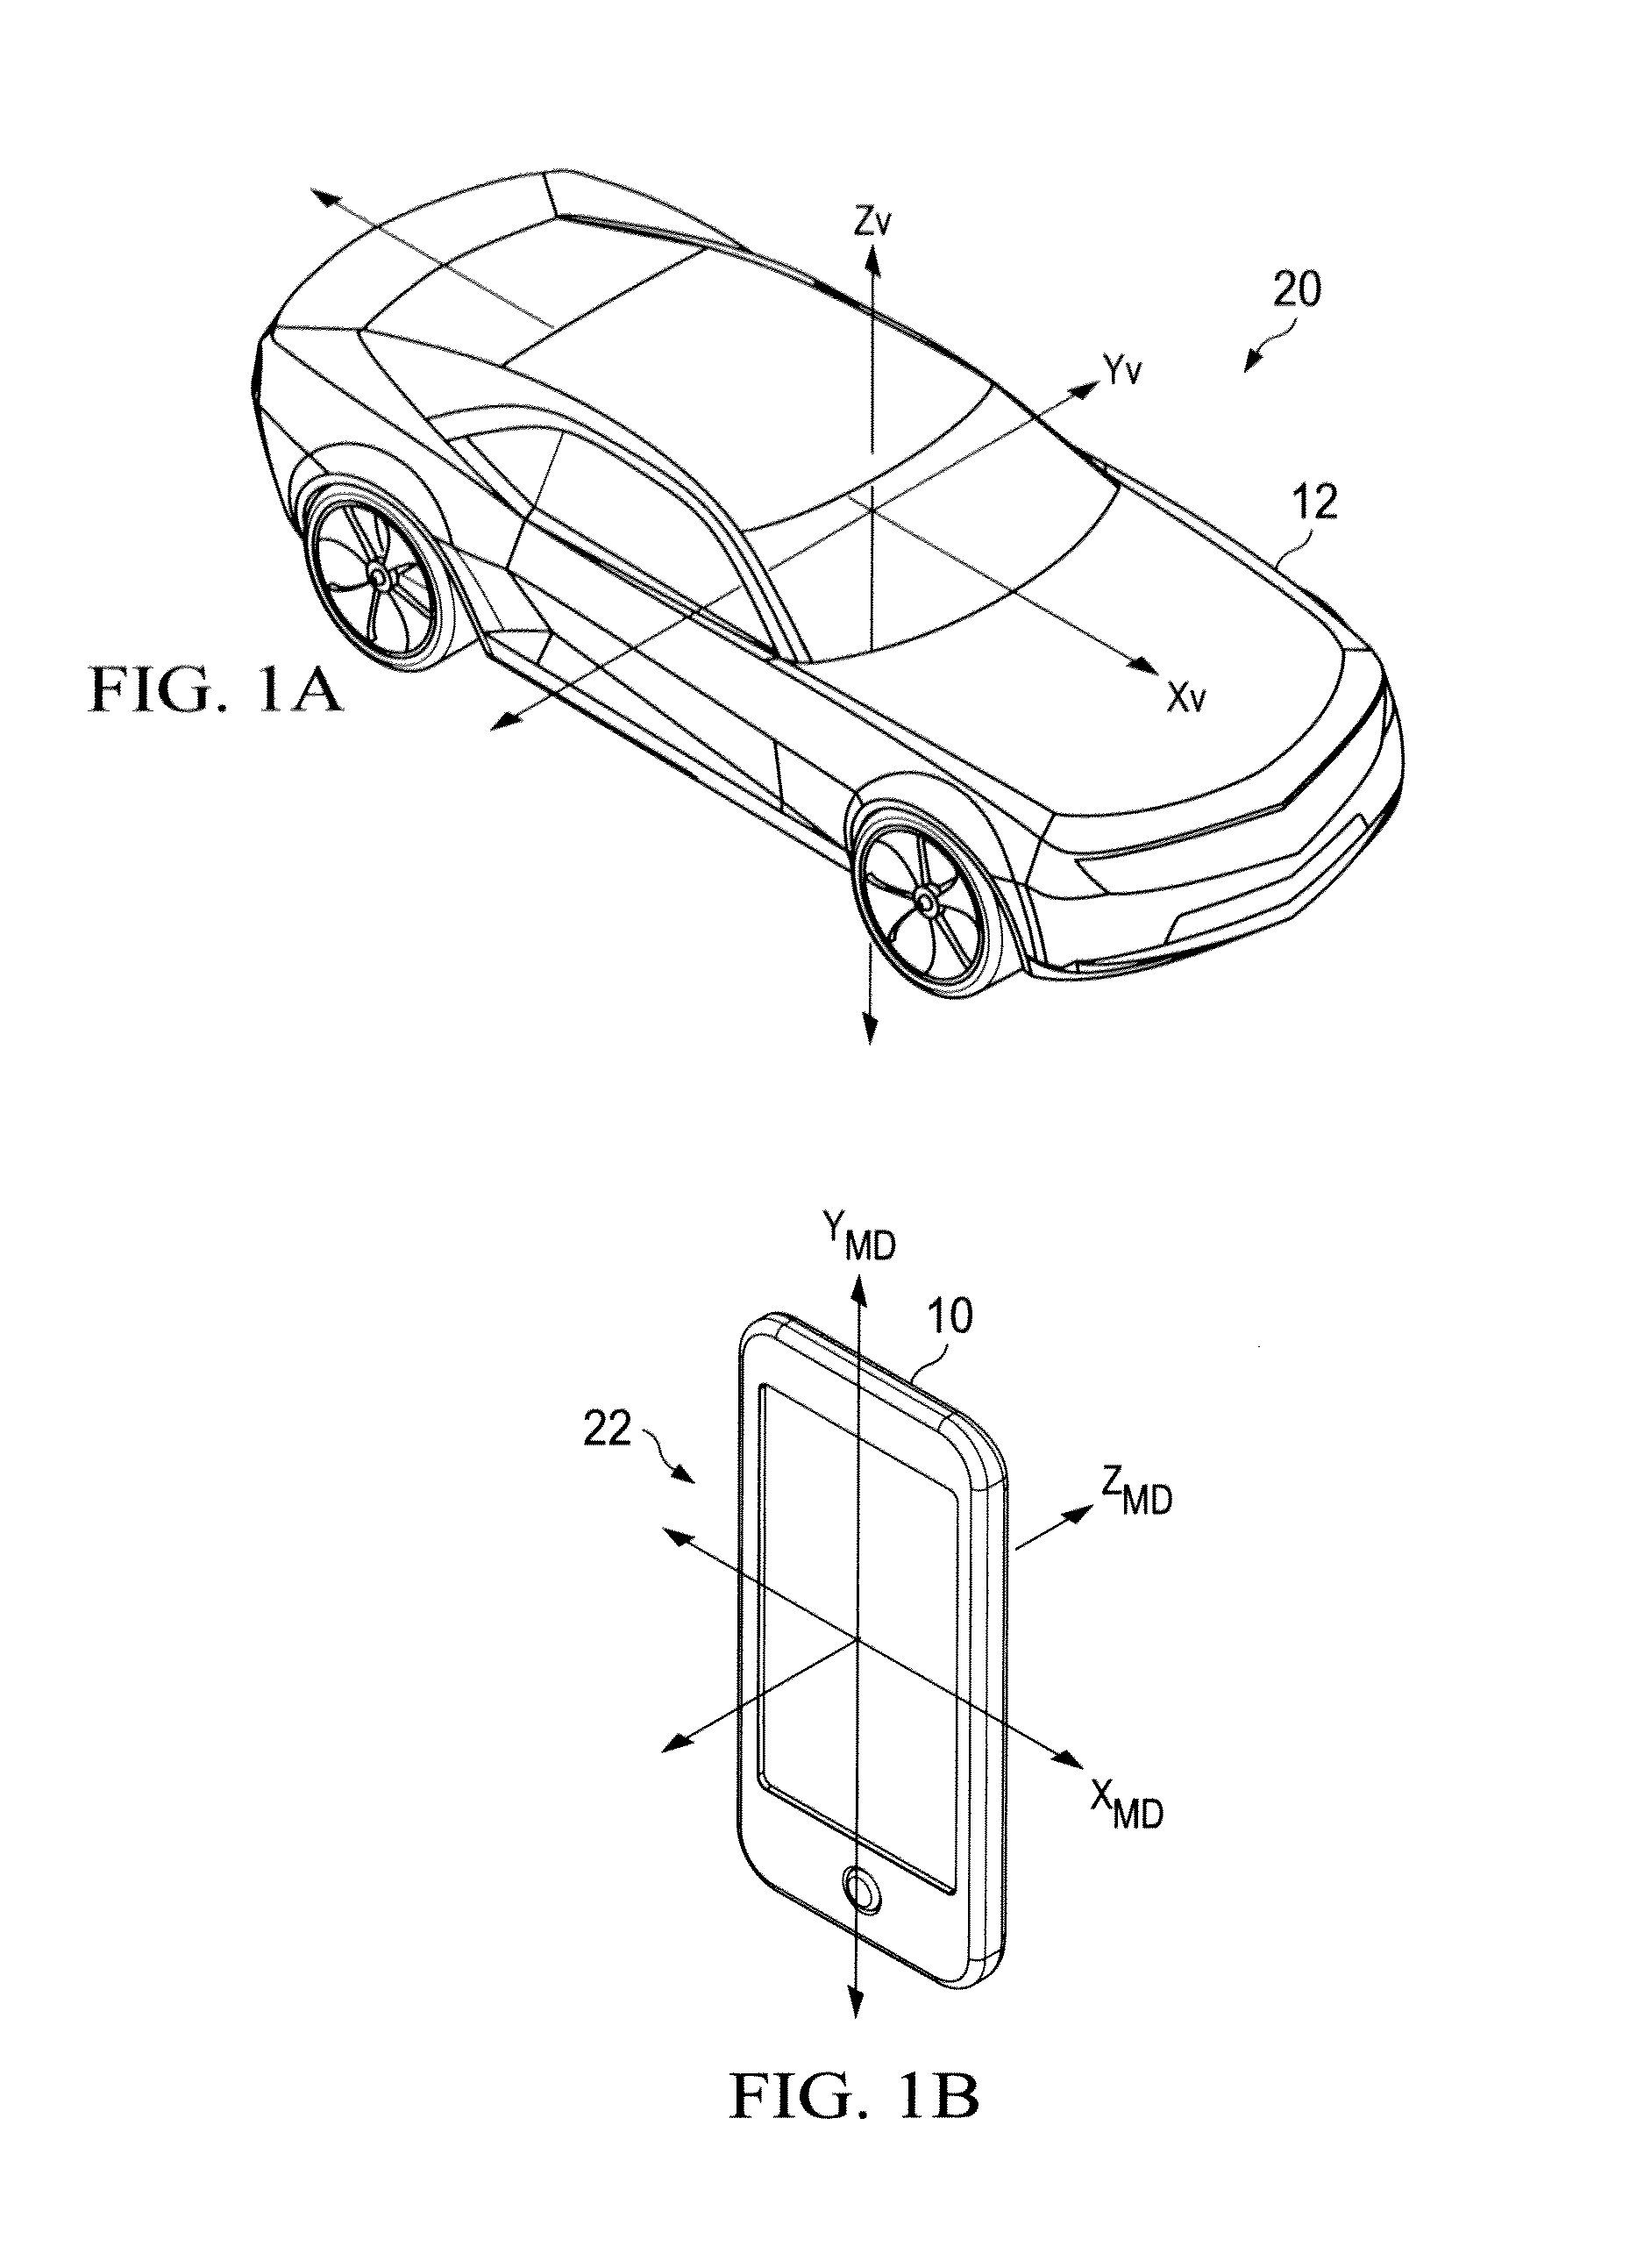 System and Method for Auto-Calibration and Auto-Correction of Primary and Secondary Motion for Telematics Applications via Wireless Mobile Devices